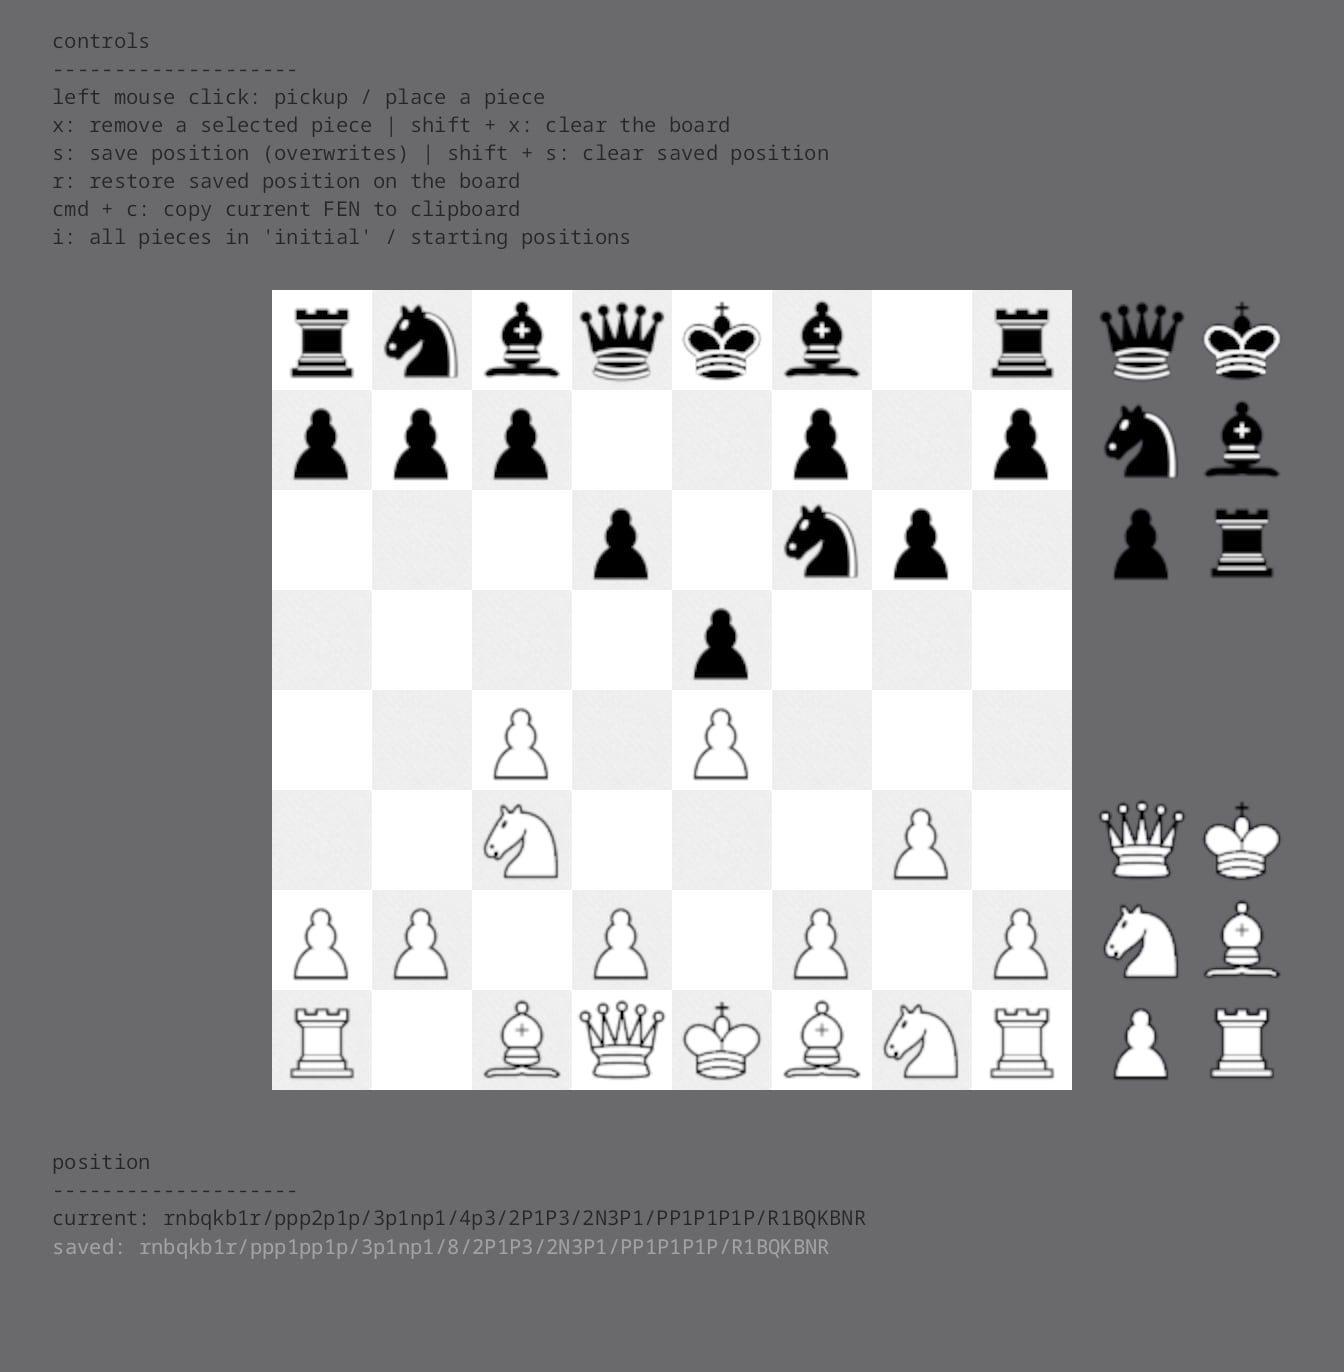 grey and white chess board, grey and white pieces each in their starting positions and a selection menu of each piece along the right edge of the board. below the board are white letters on a black background describing the positions on the board in FEN notation along with a note that you can click to copy the FEN description.